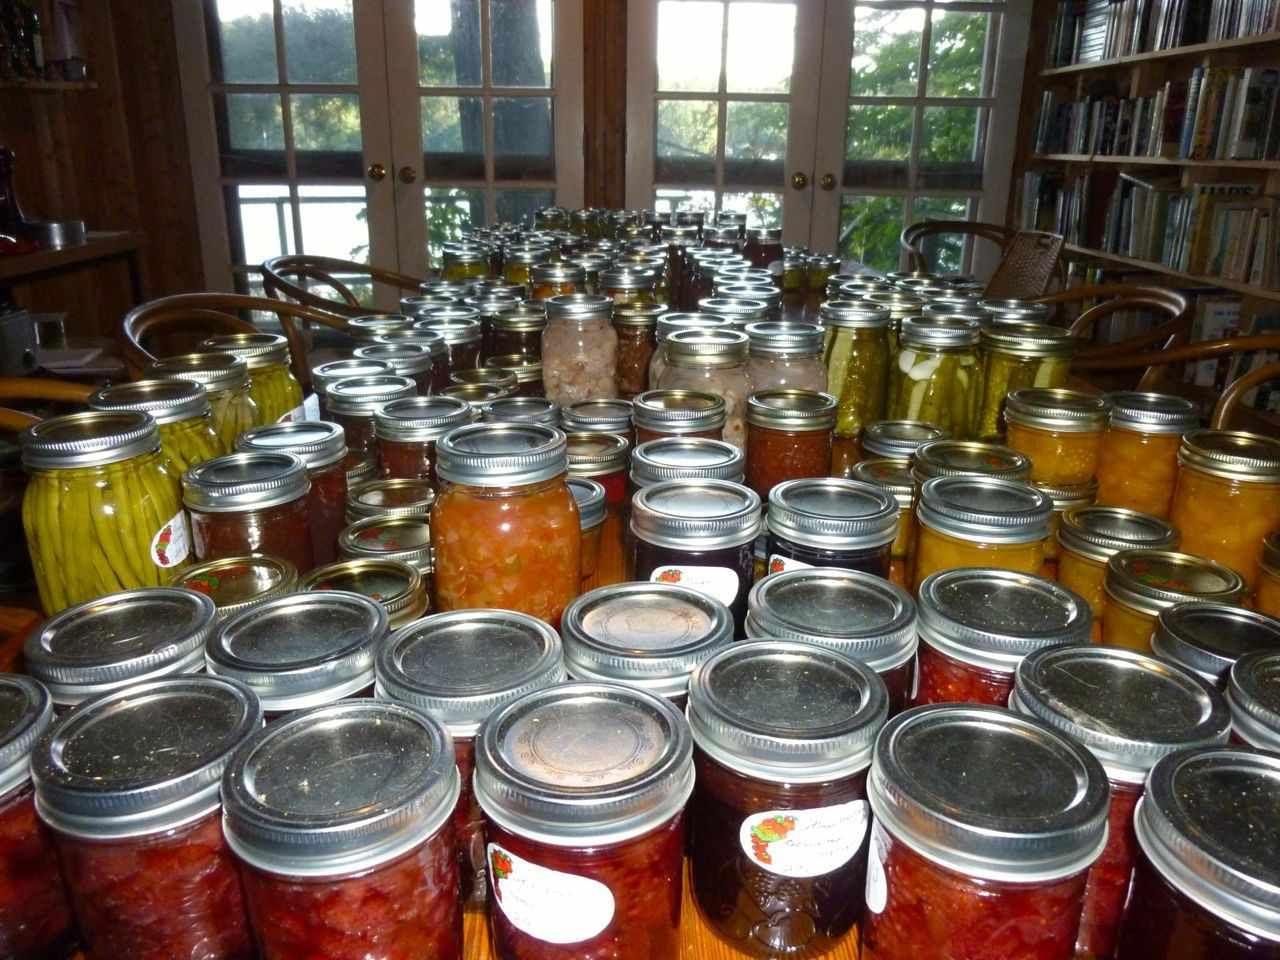 Kelly is canning at the cottage